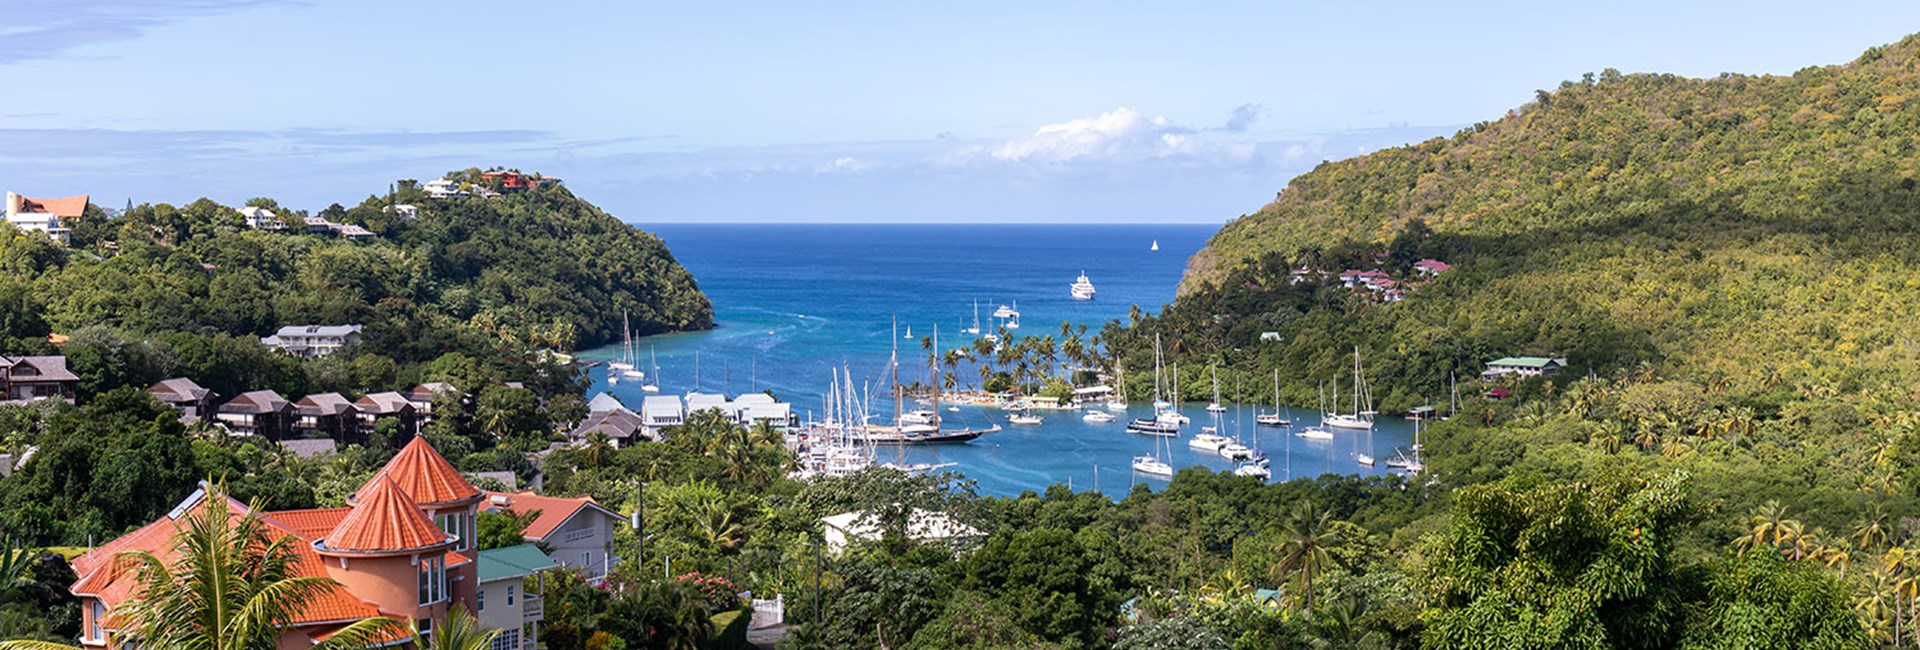 View of boats in Marigot Bay and the surrounding hills of forests